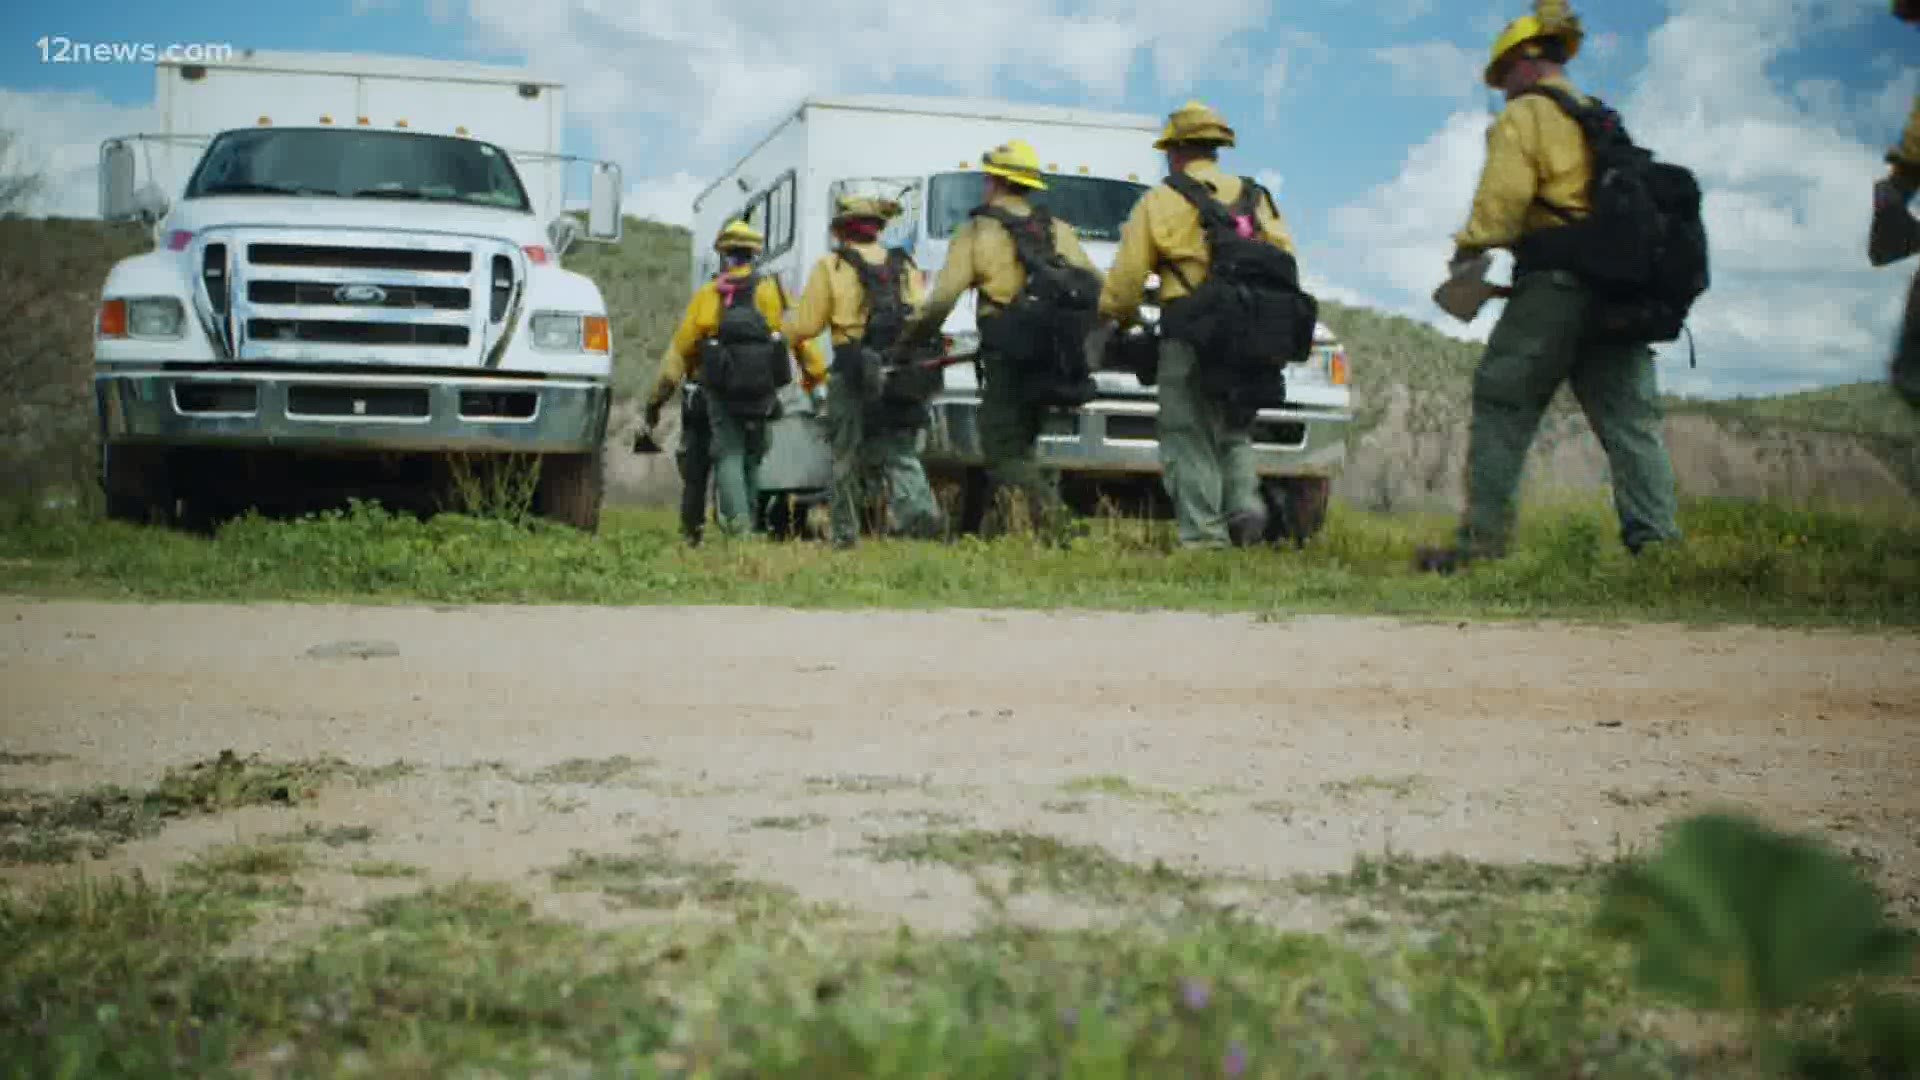 A wildland firefighting crew made up entirely of inmates is ready to protect Arizona this wildfire season.